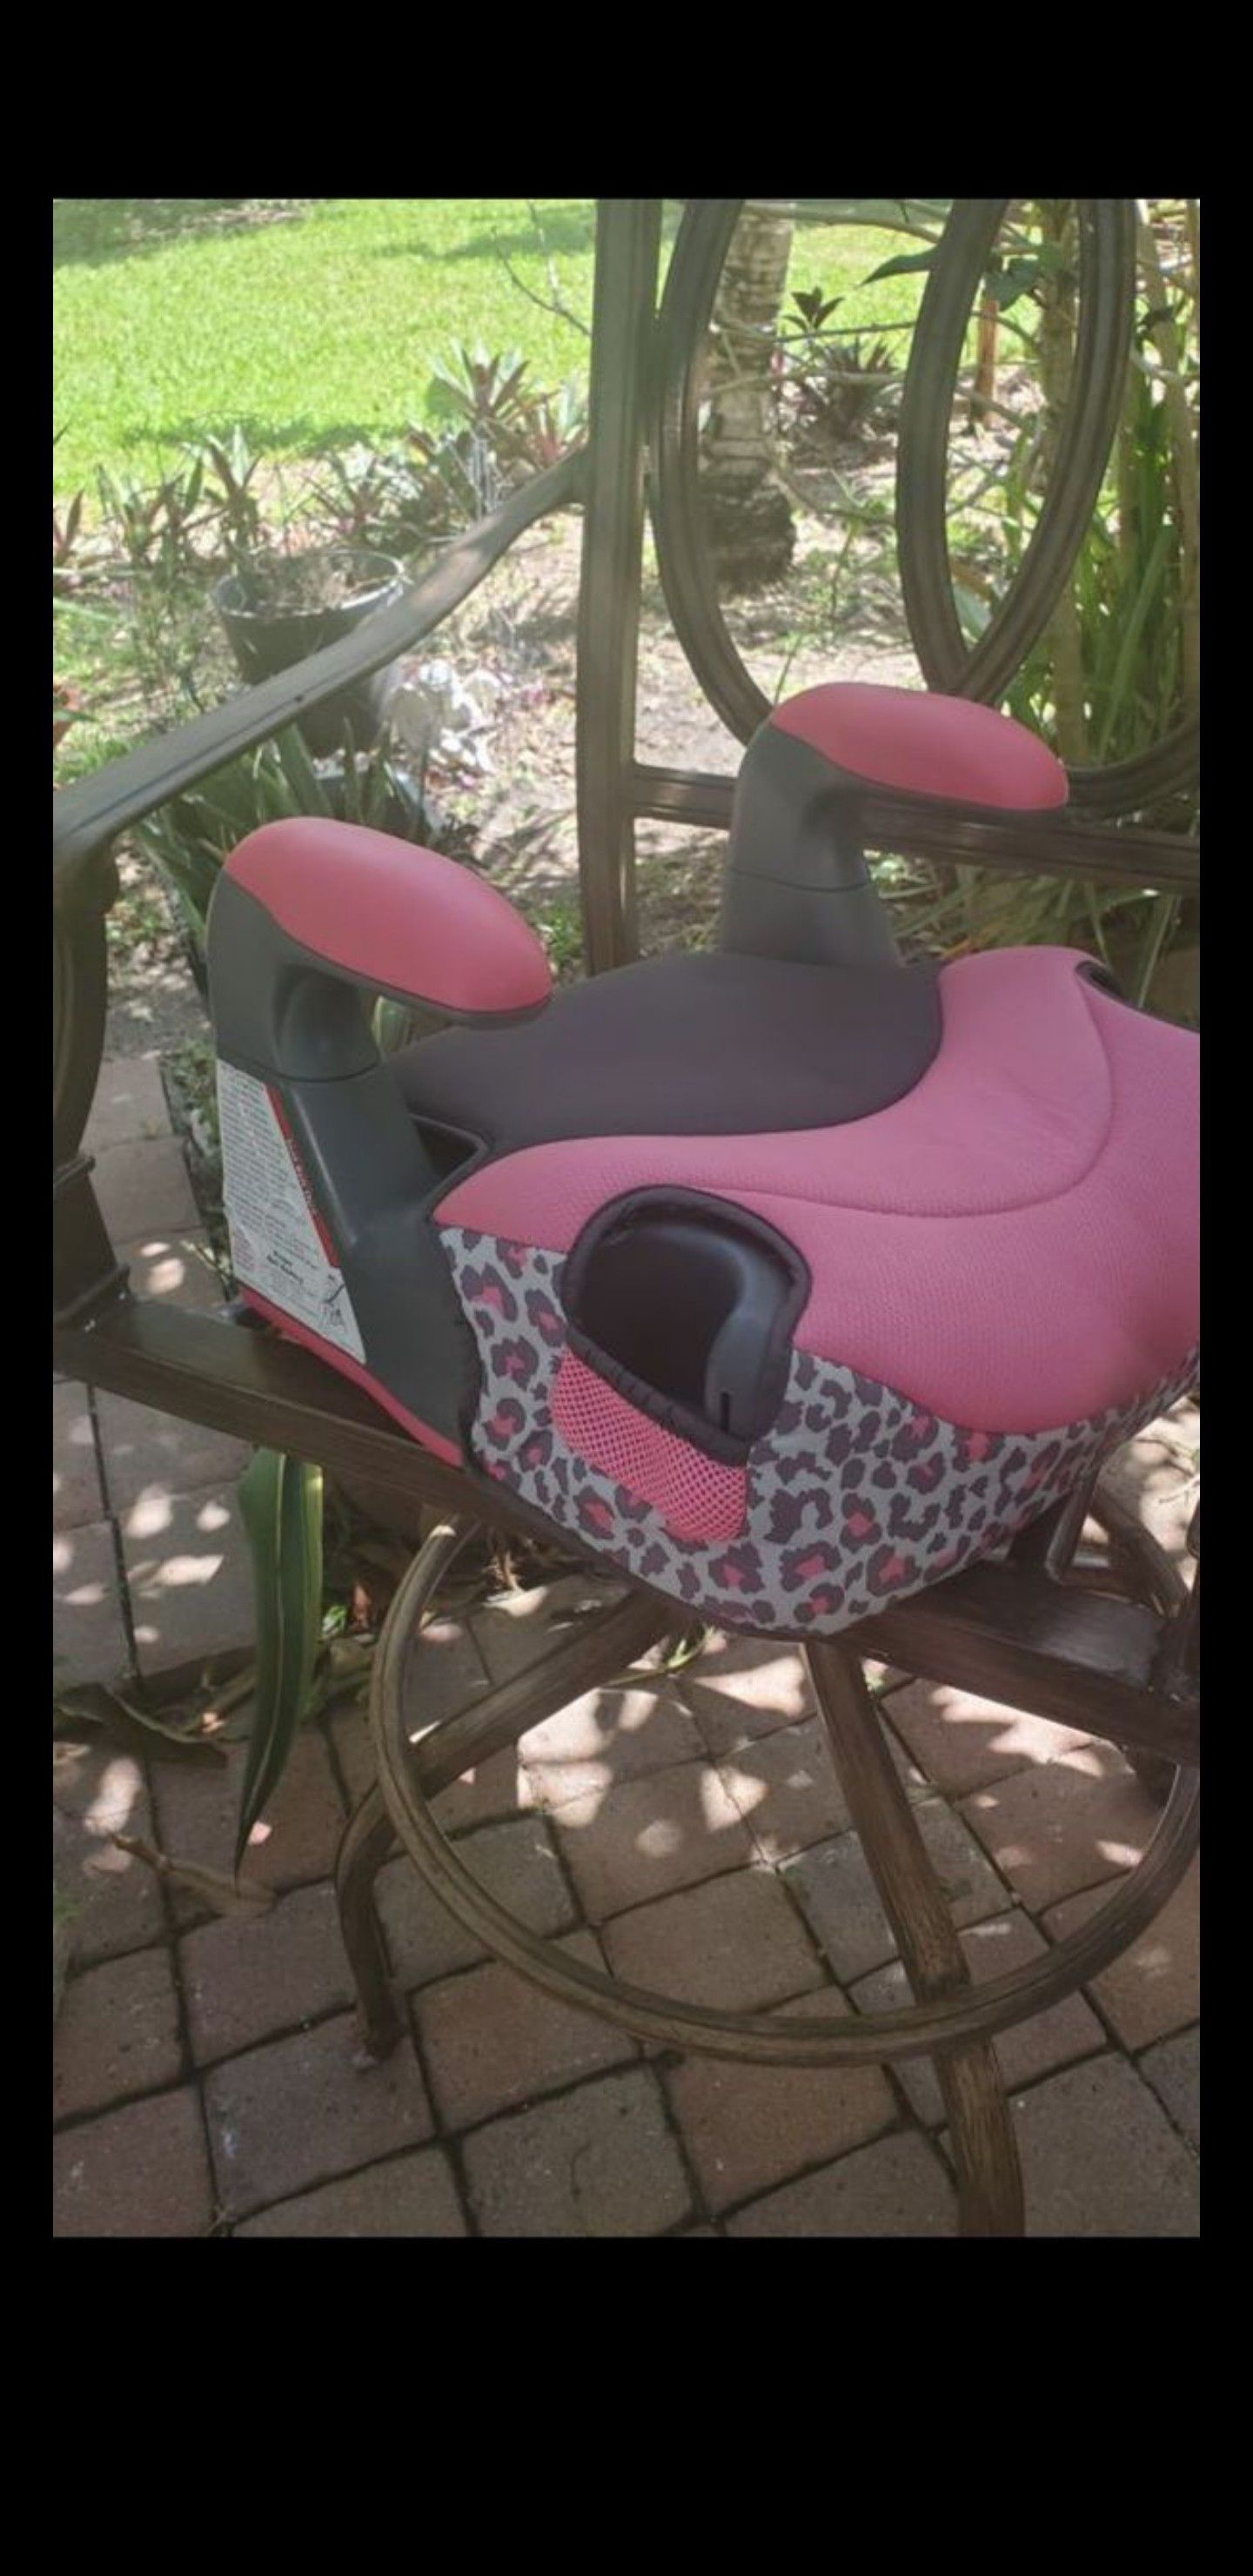 evenflo booster seat pink and grey in great condition baby seat ....LOCATED ON KROME AND SW 200ST